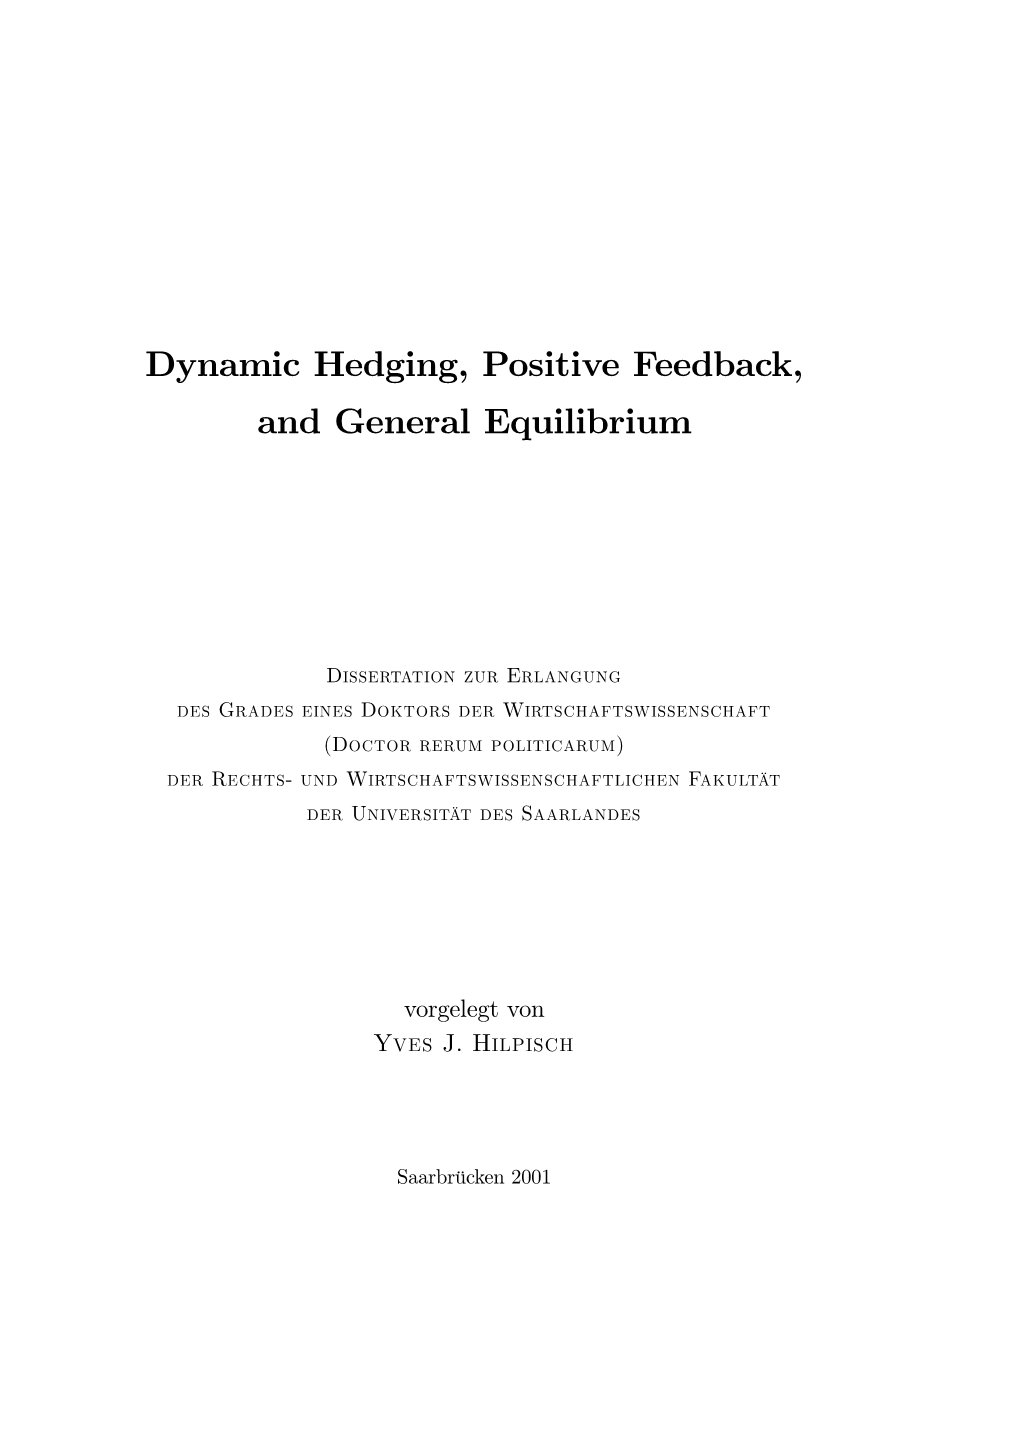 Dynamic Hedging, Positive Feedback, and General Equilibrium